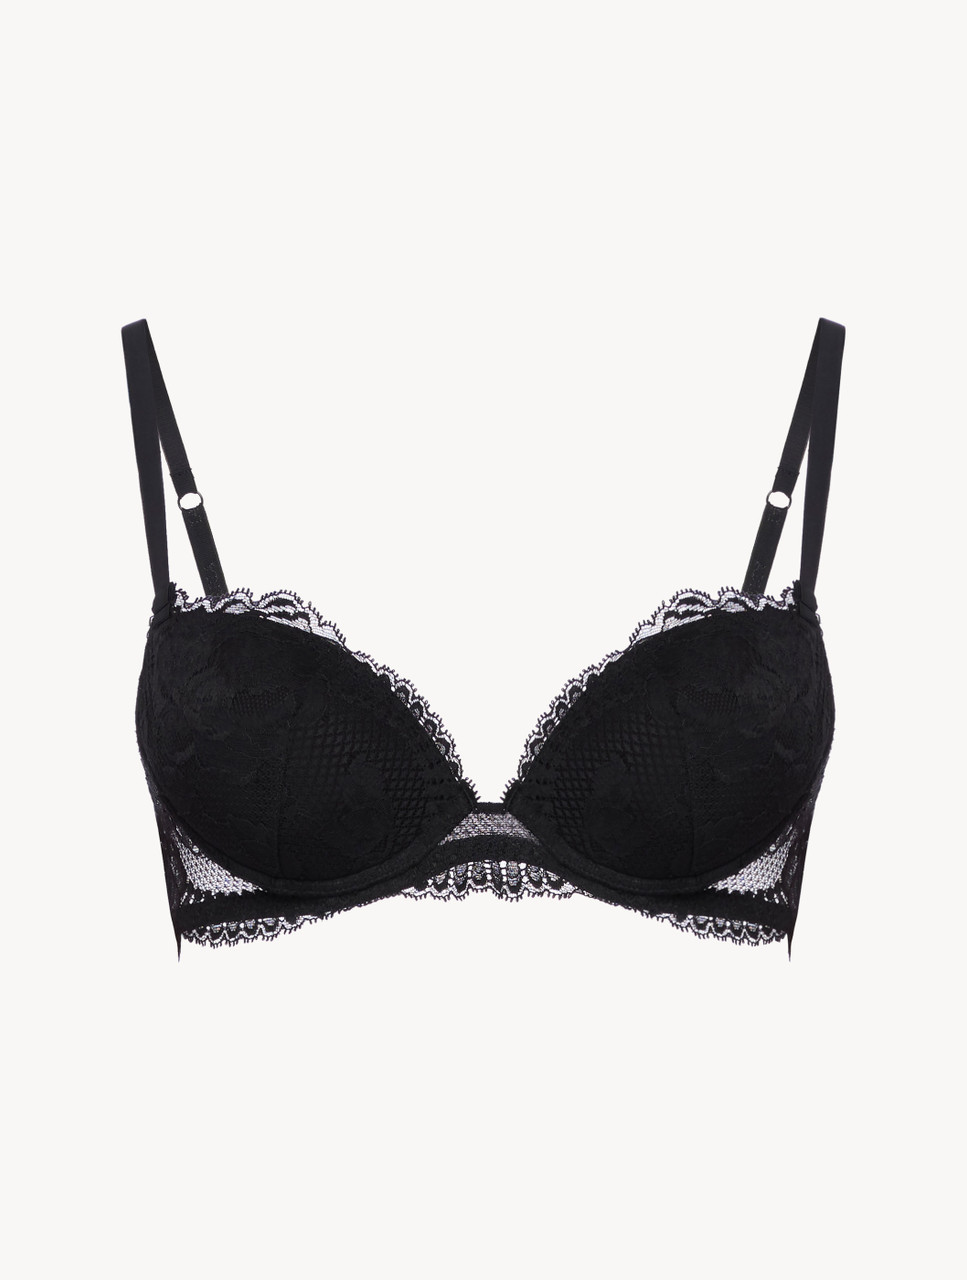 Mamia Lingerie Black Lace Push Up Bra Size 0X - $21 - From Trevola